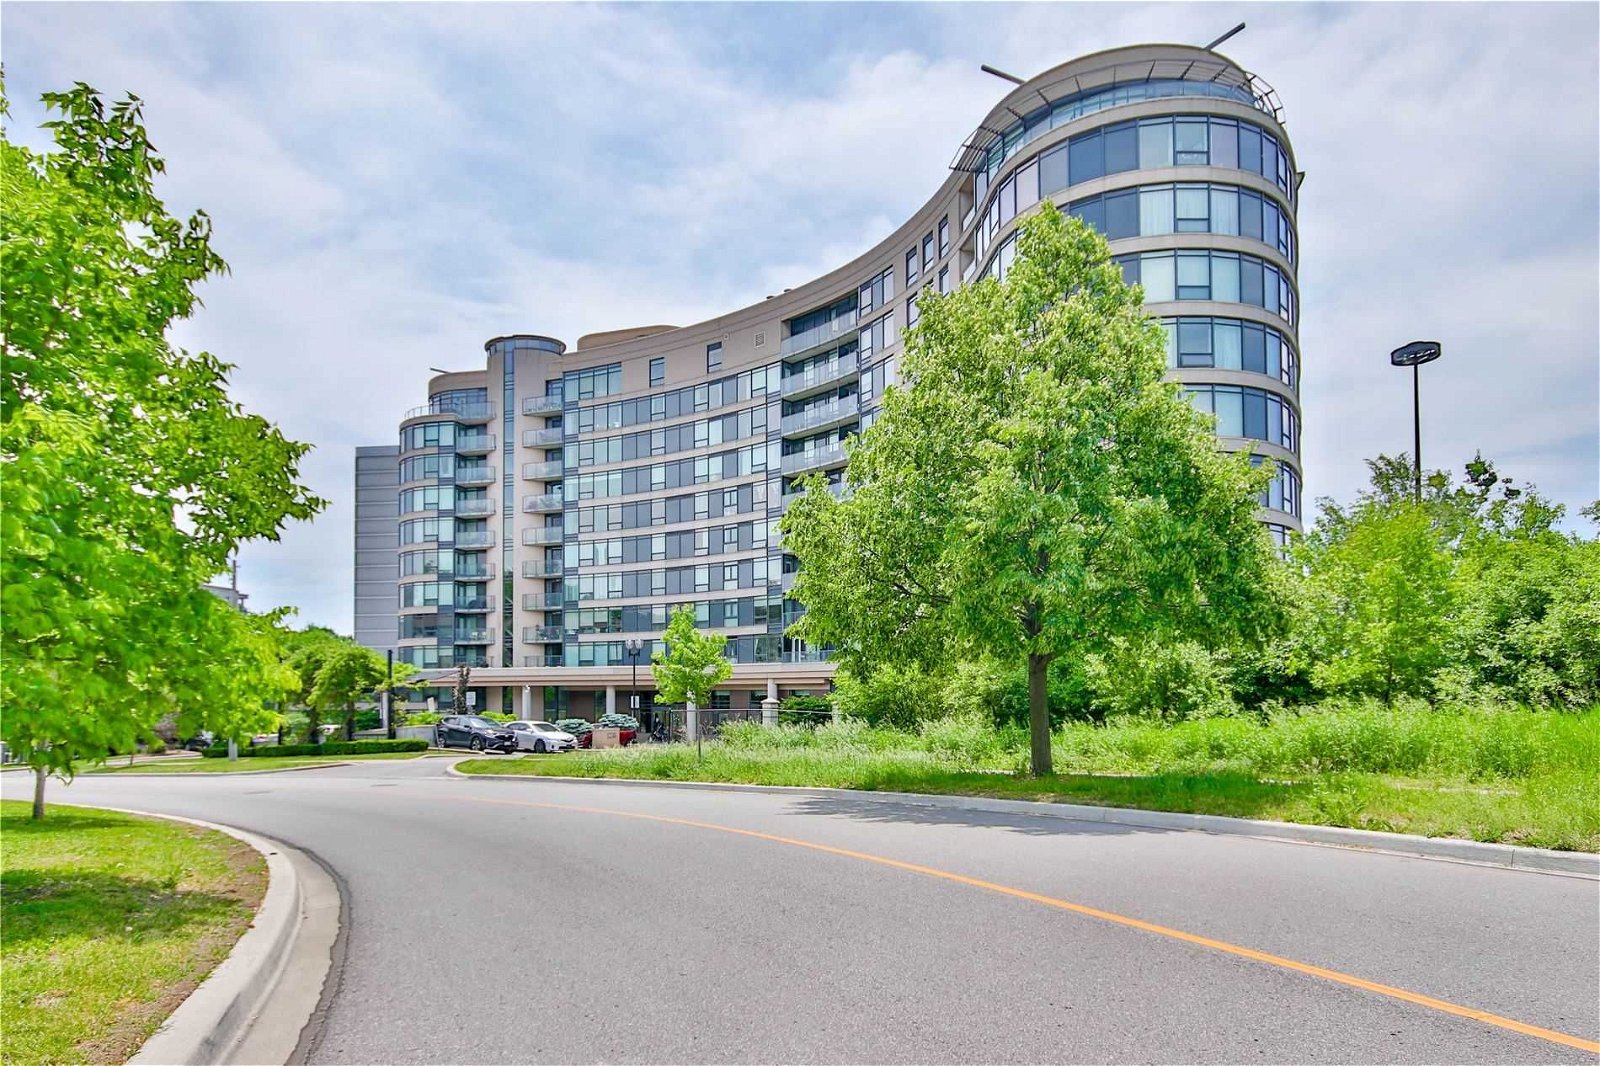 Bellair Gardens Condos located at 18 Valley Woods Rd 0